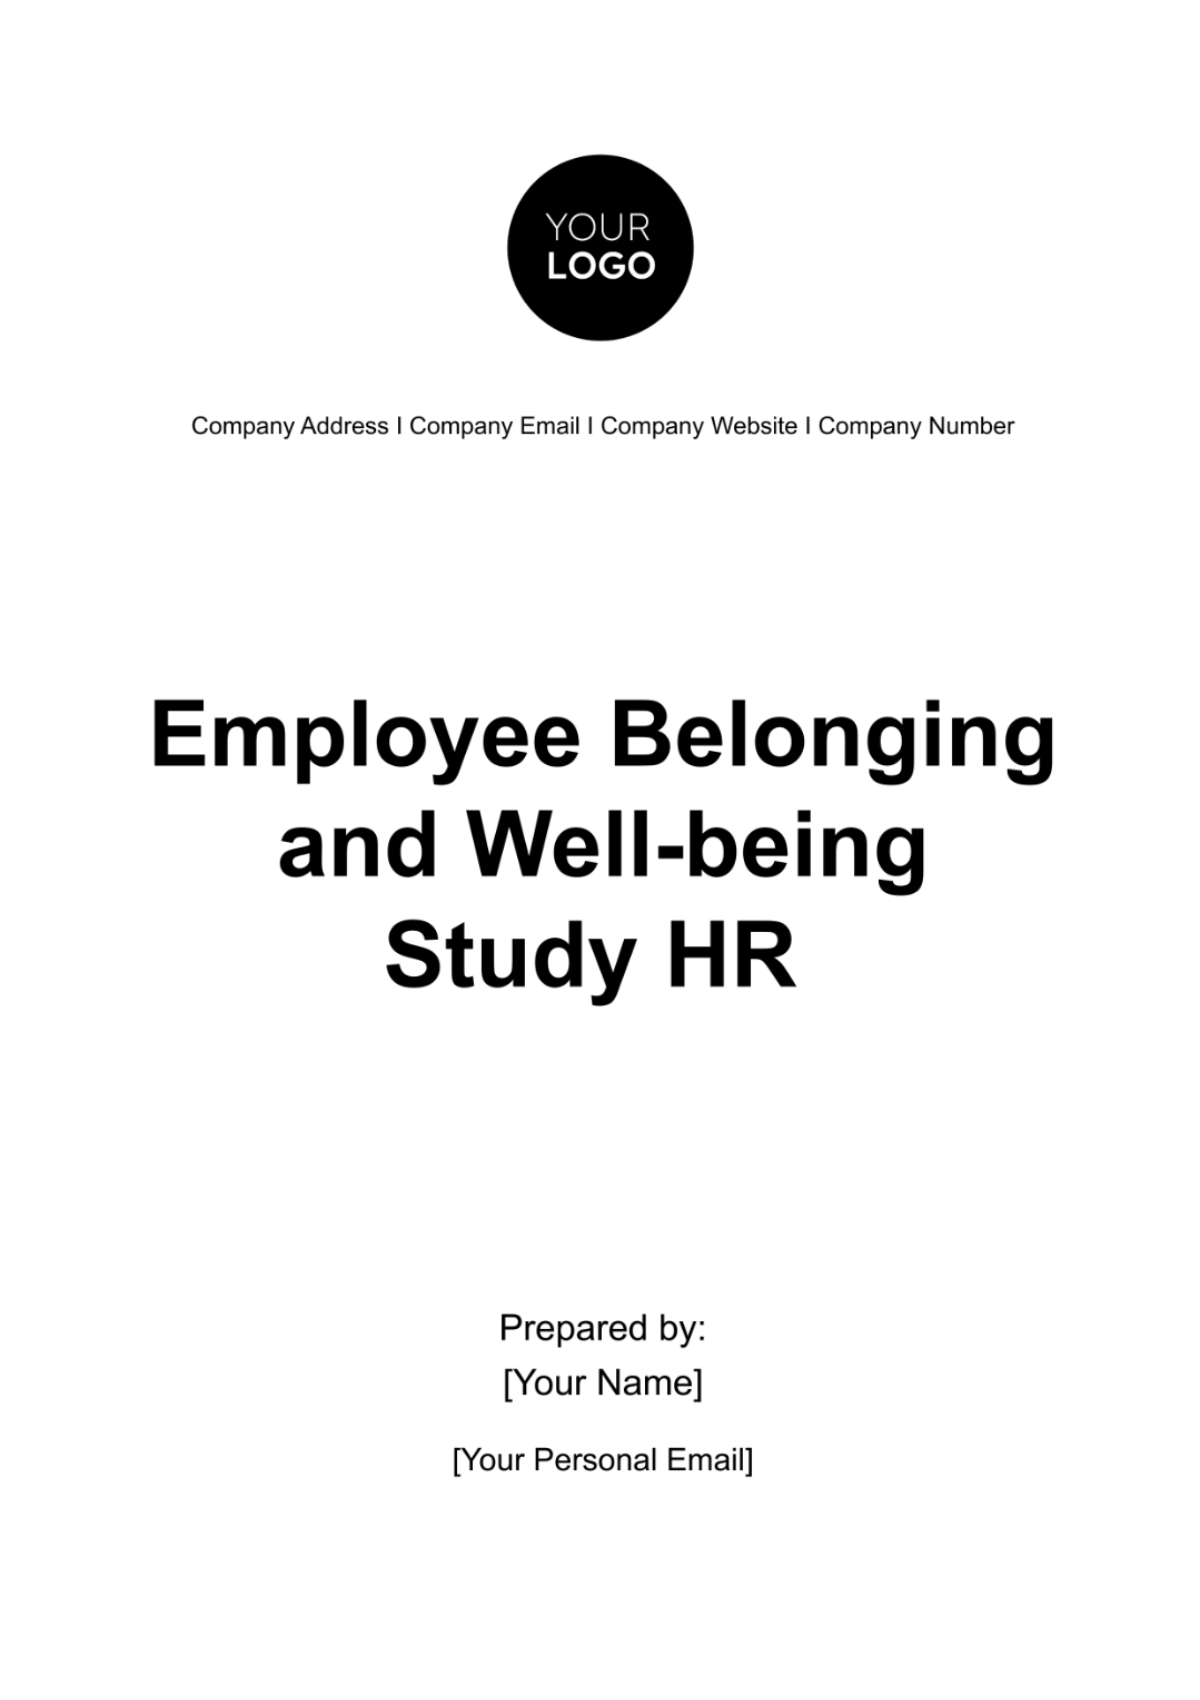 Employee Belonging and Well-being Study HR Template